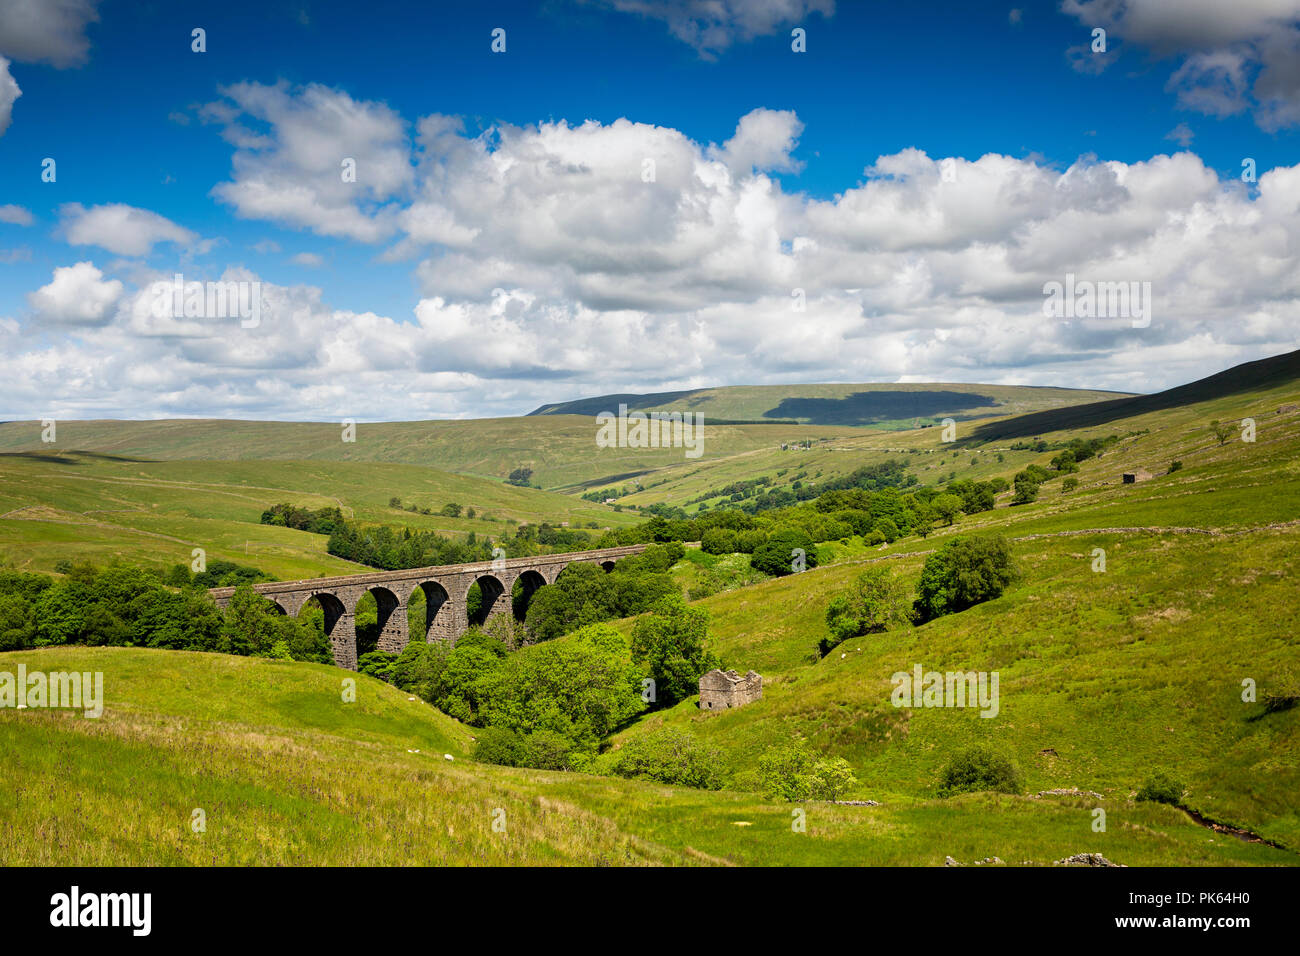 UK, Yorkshire, Dentdale, Dent Head Viaduct on Settle to Carlisle Railway Line Stock Photo